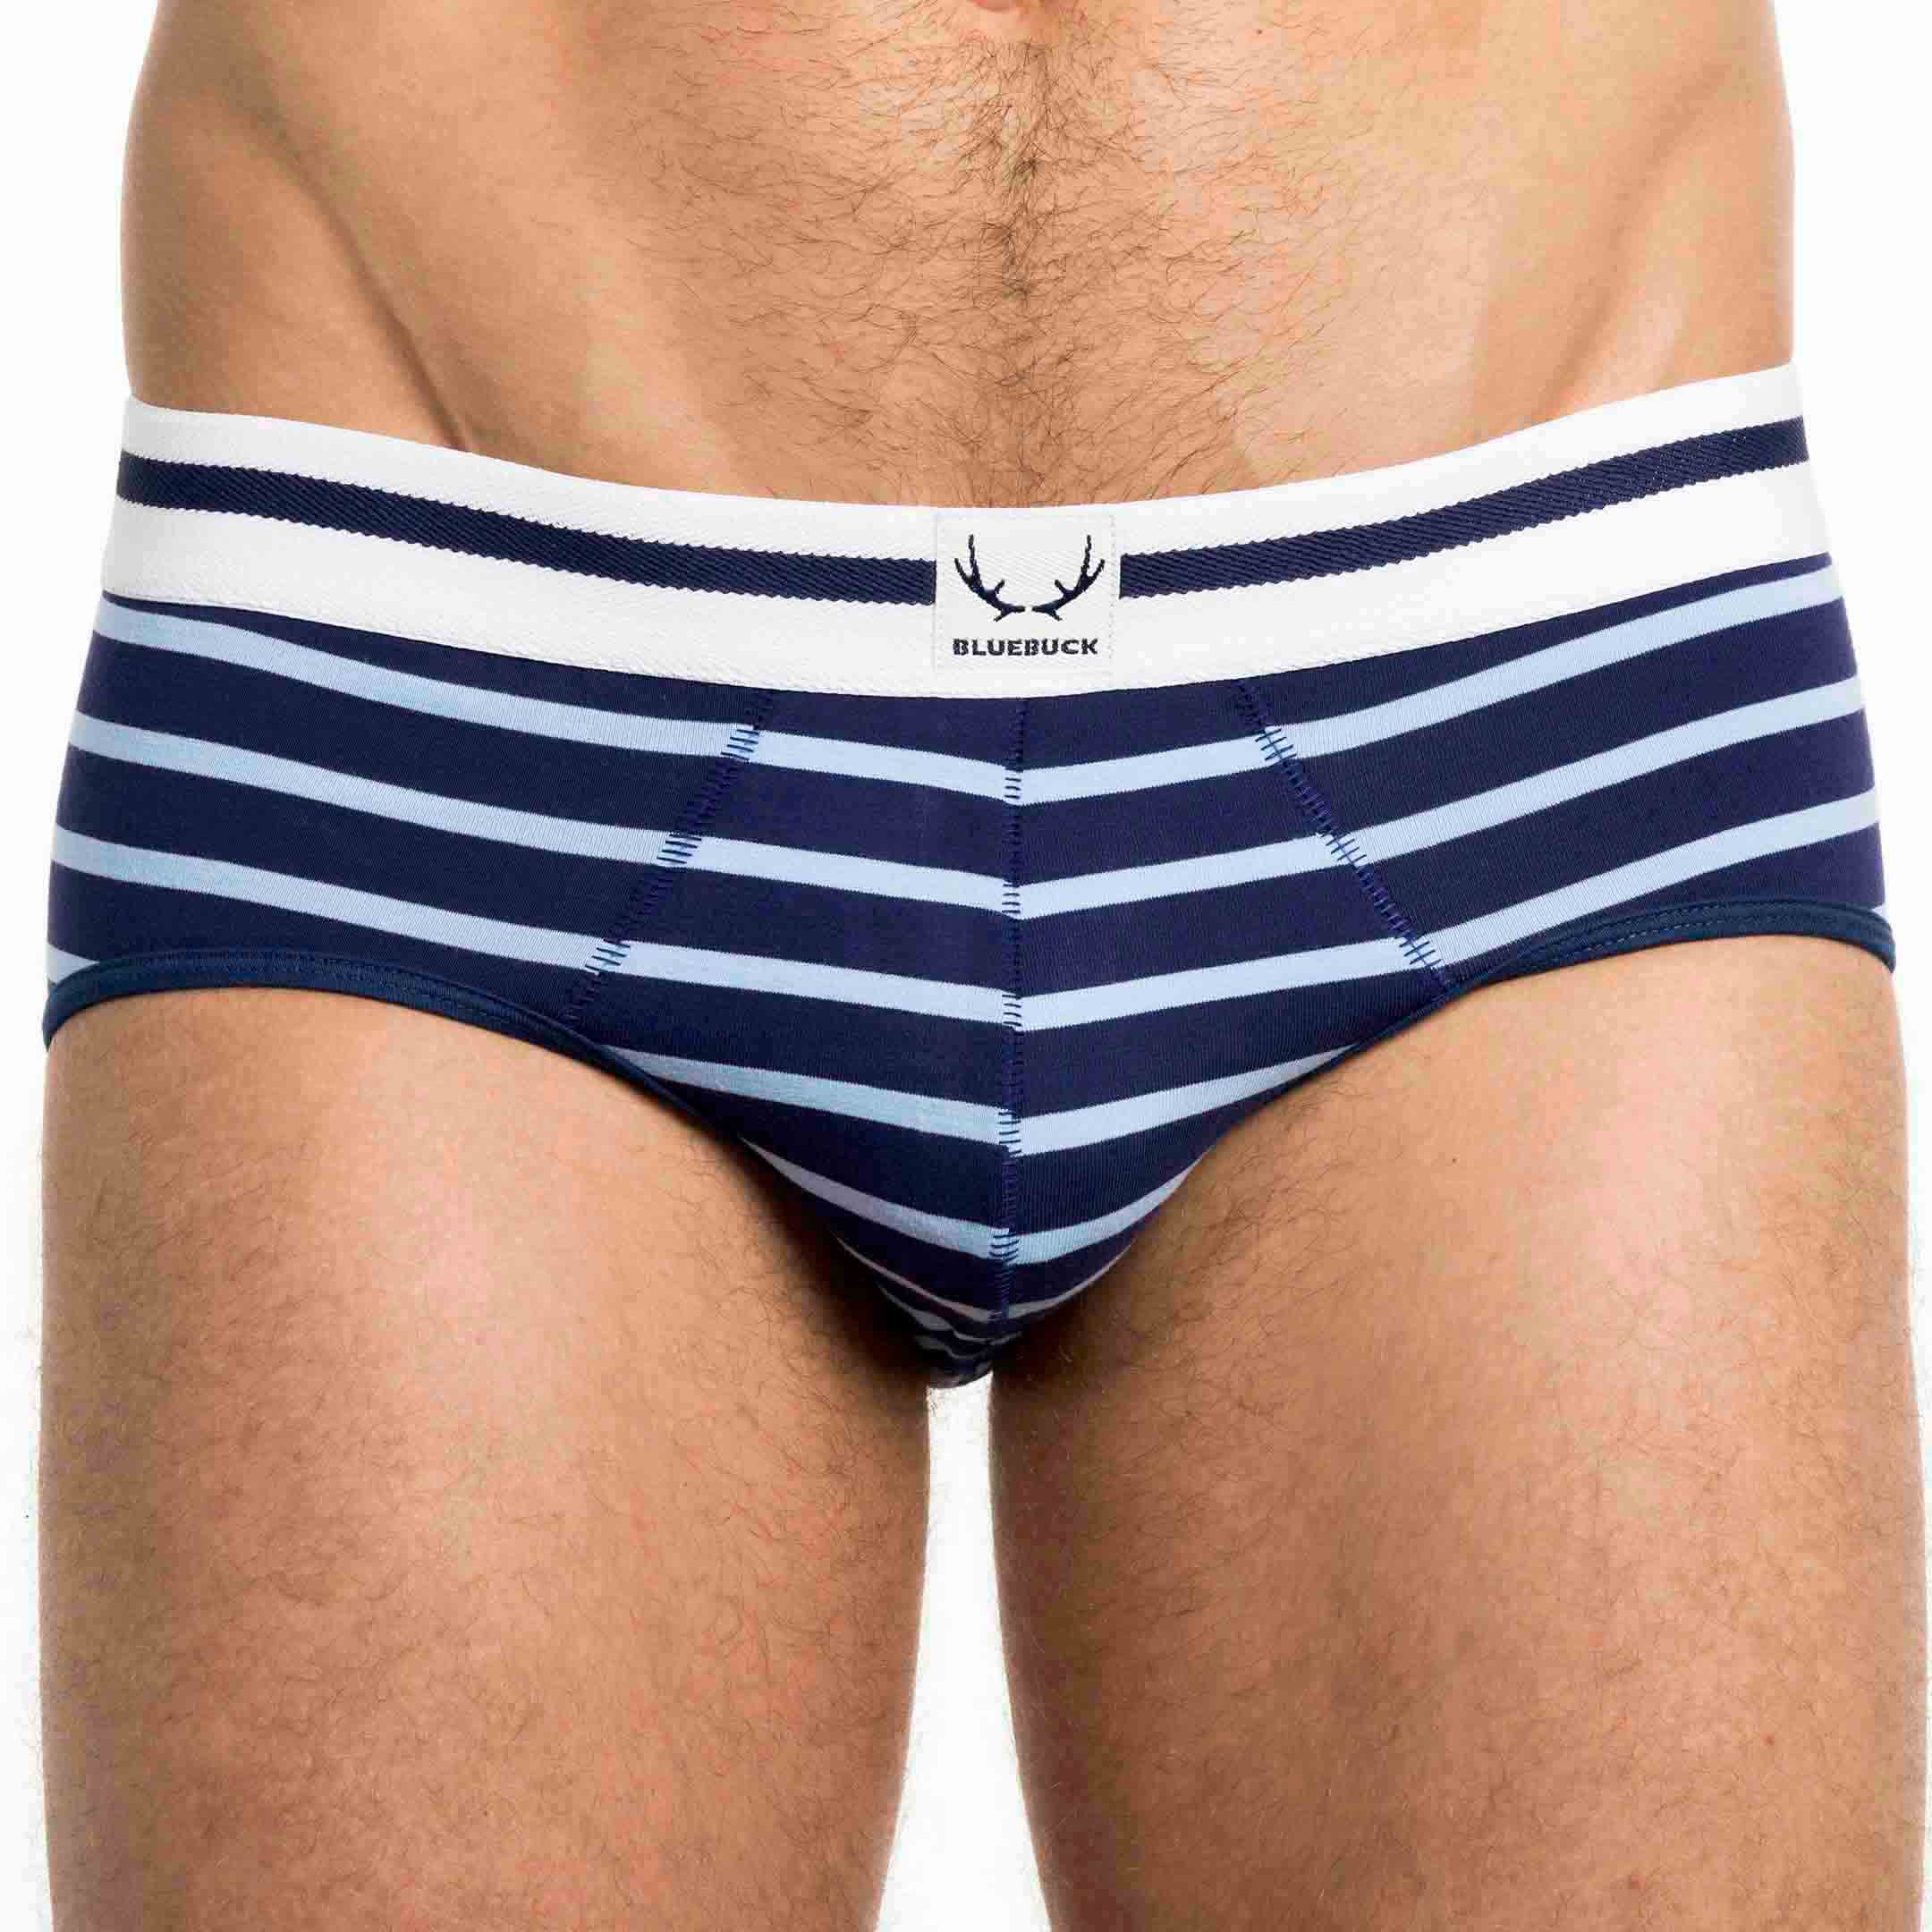 Dark and light blue striped underpants made of organic cotton from Bluebuck